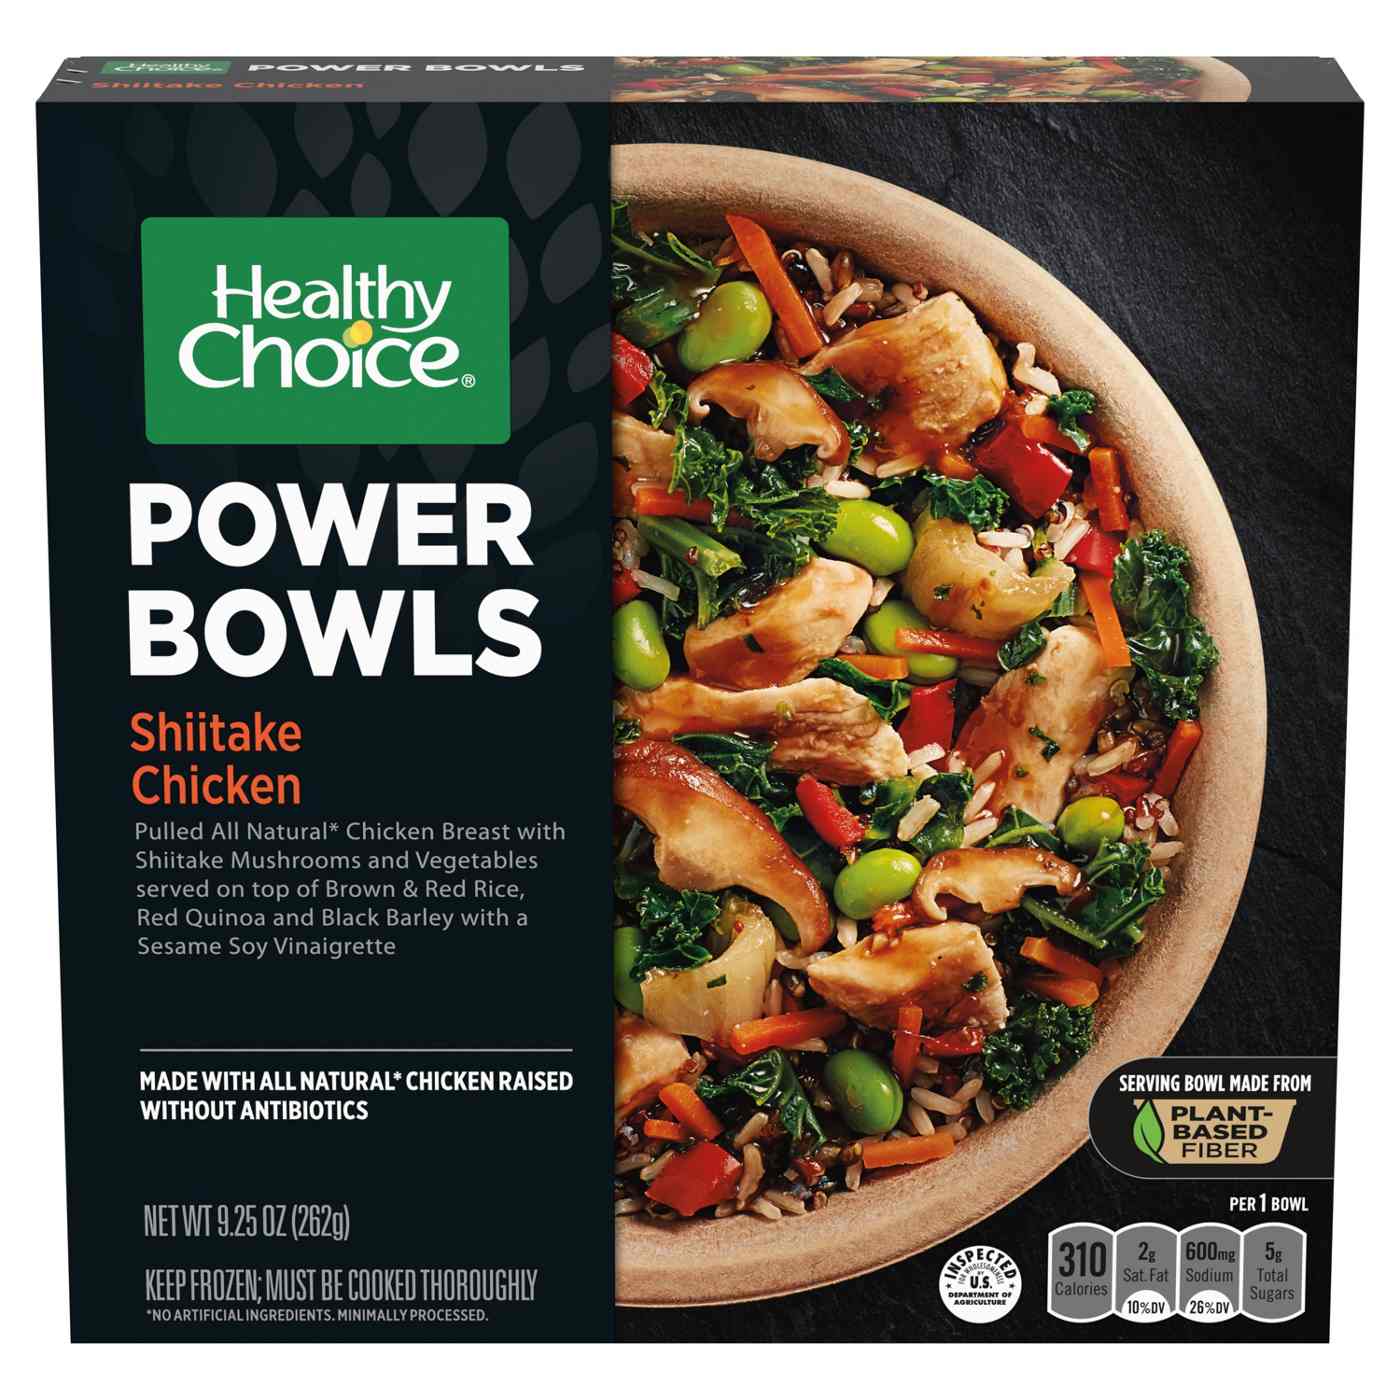 Healthy Choice Power Bowls Shiitake Chicken Frozen Meal; image 1 of 7